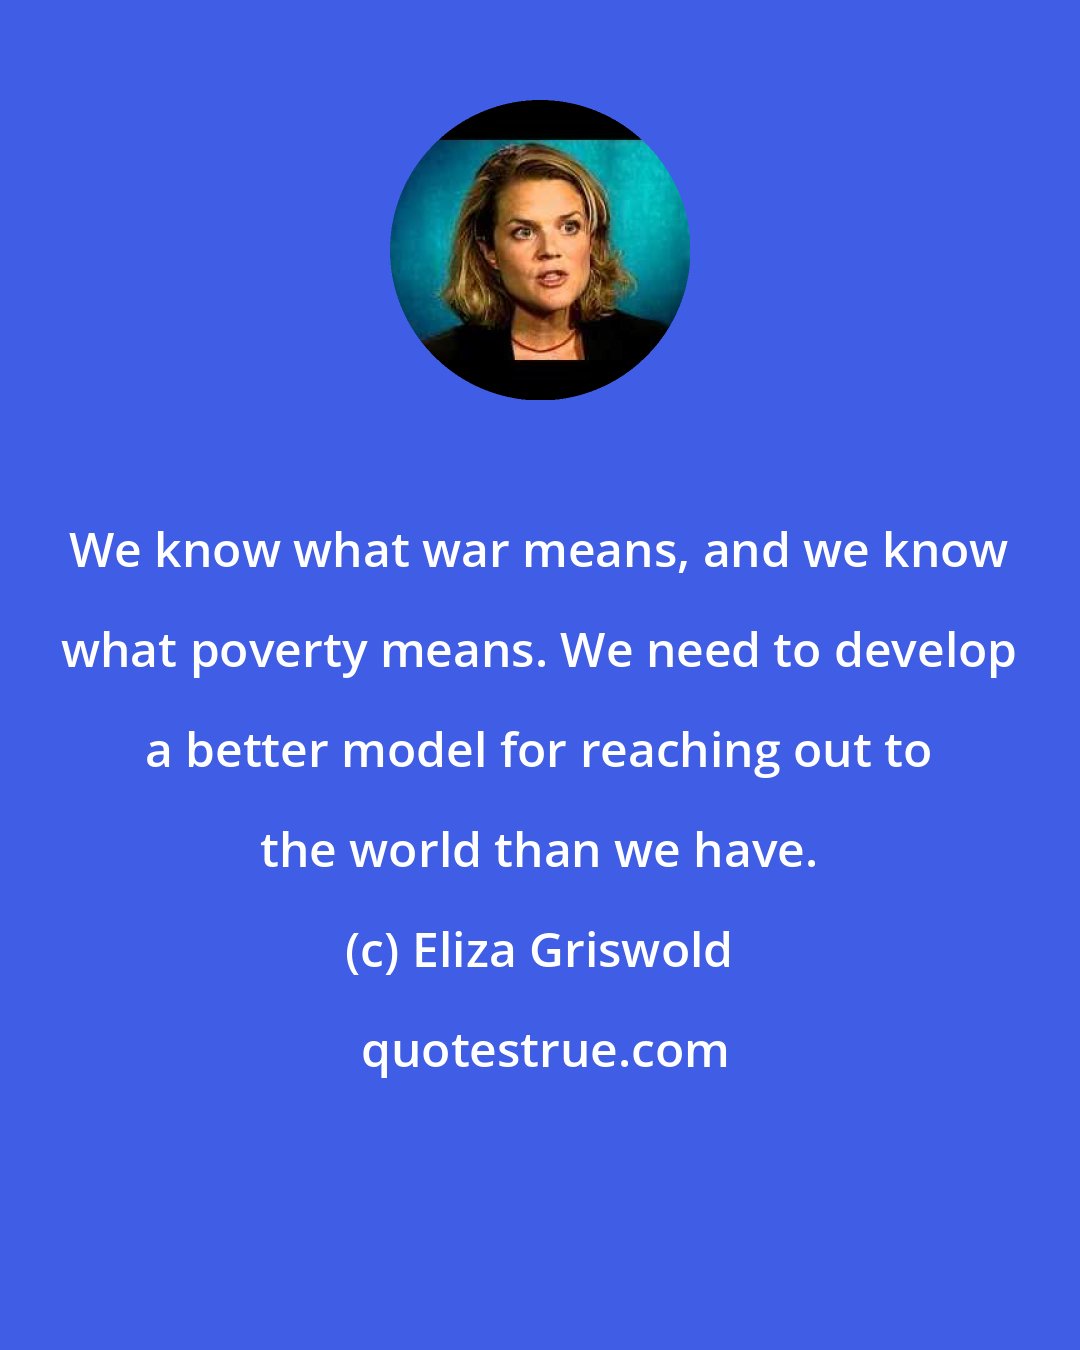 Eliza Griswold: We know what war means, and we know what poverty means. We need to develop a better model for reaching out to the world than we have.